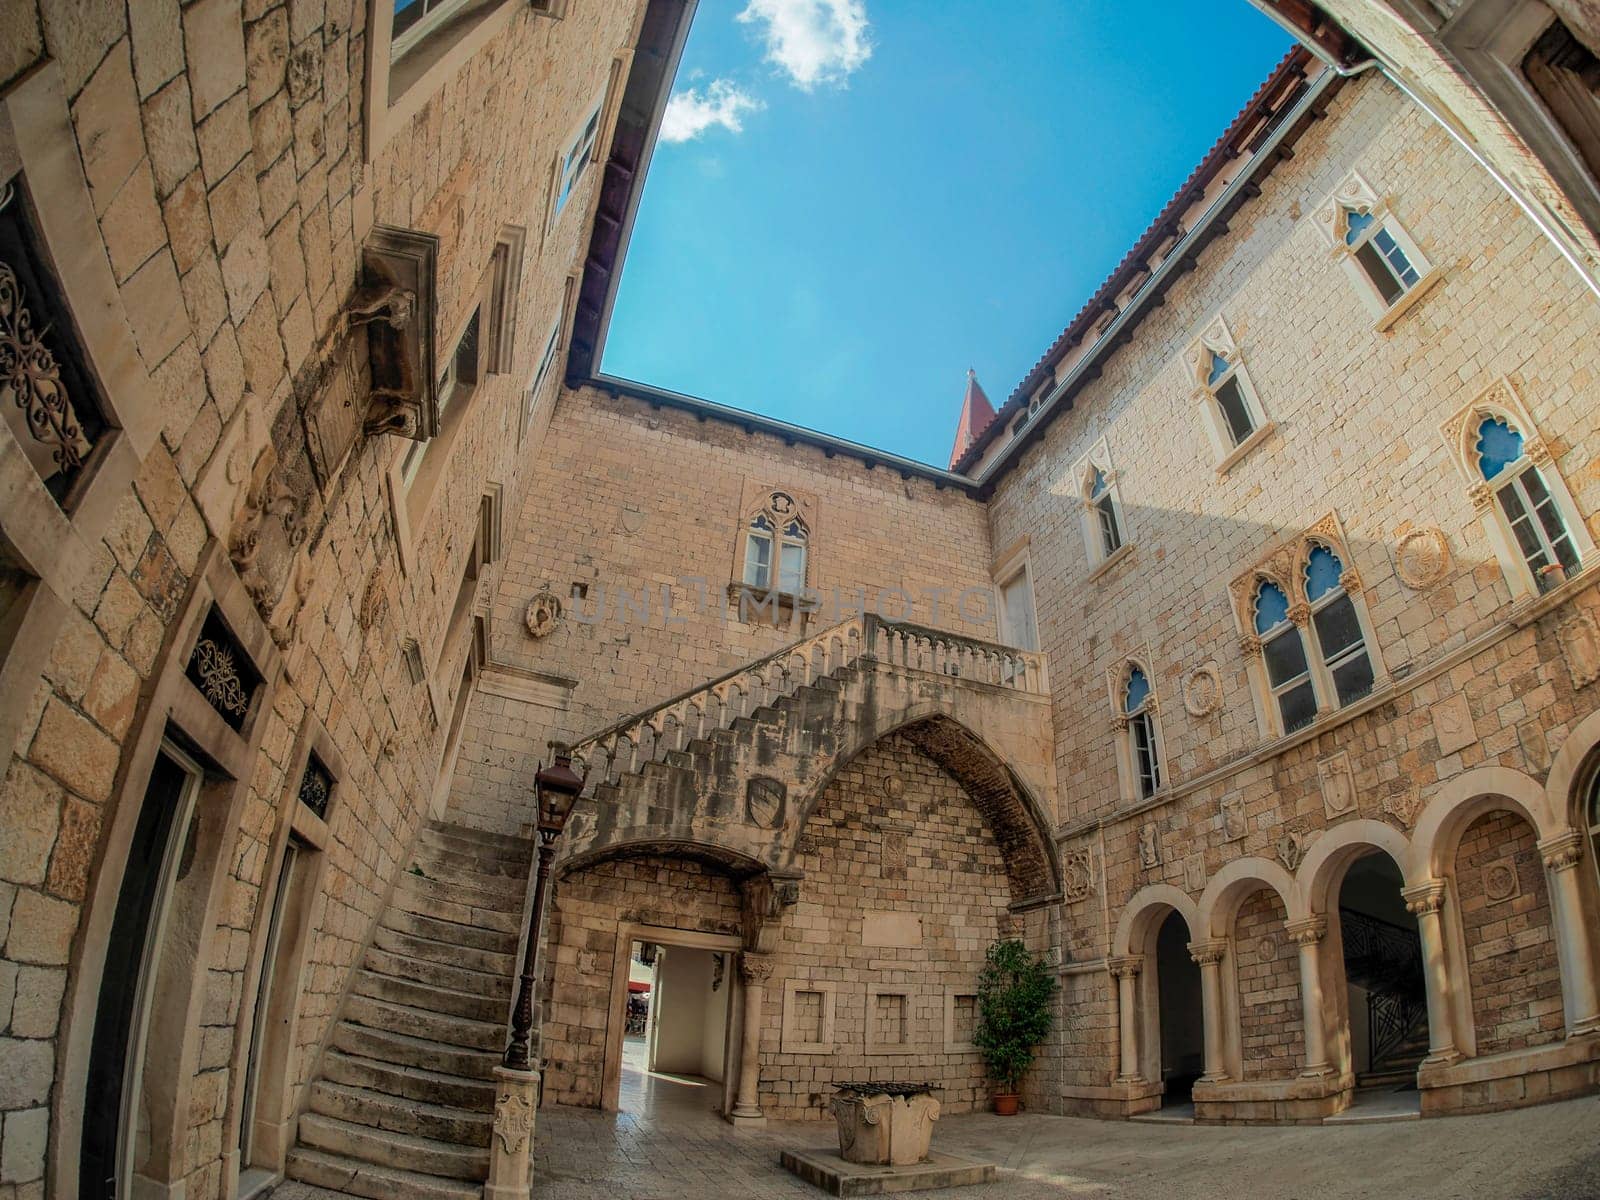 Loggia of Trogir medieval town in Dalmatia Croatia UNESCO World Heritage Site Old city and building detail.